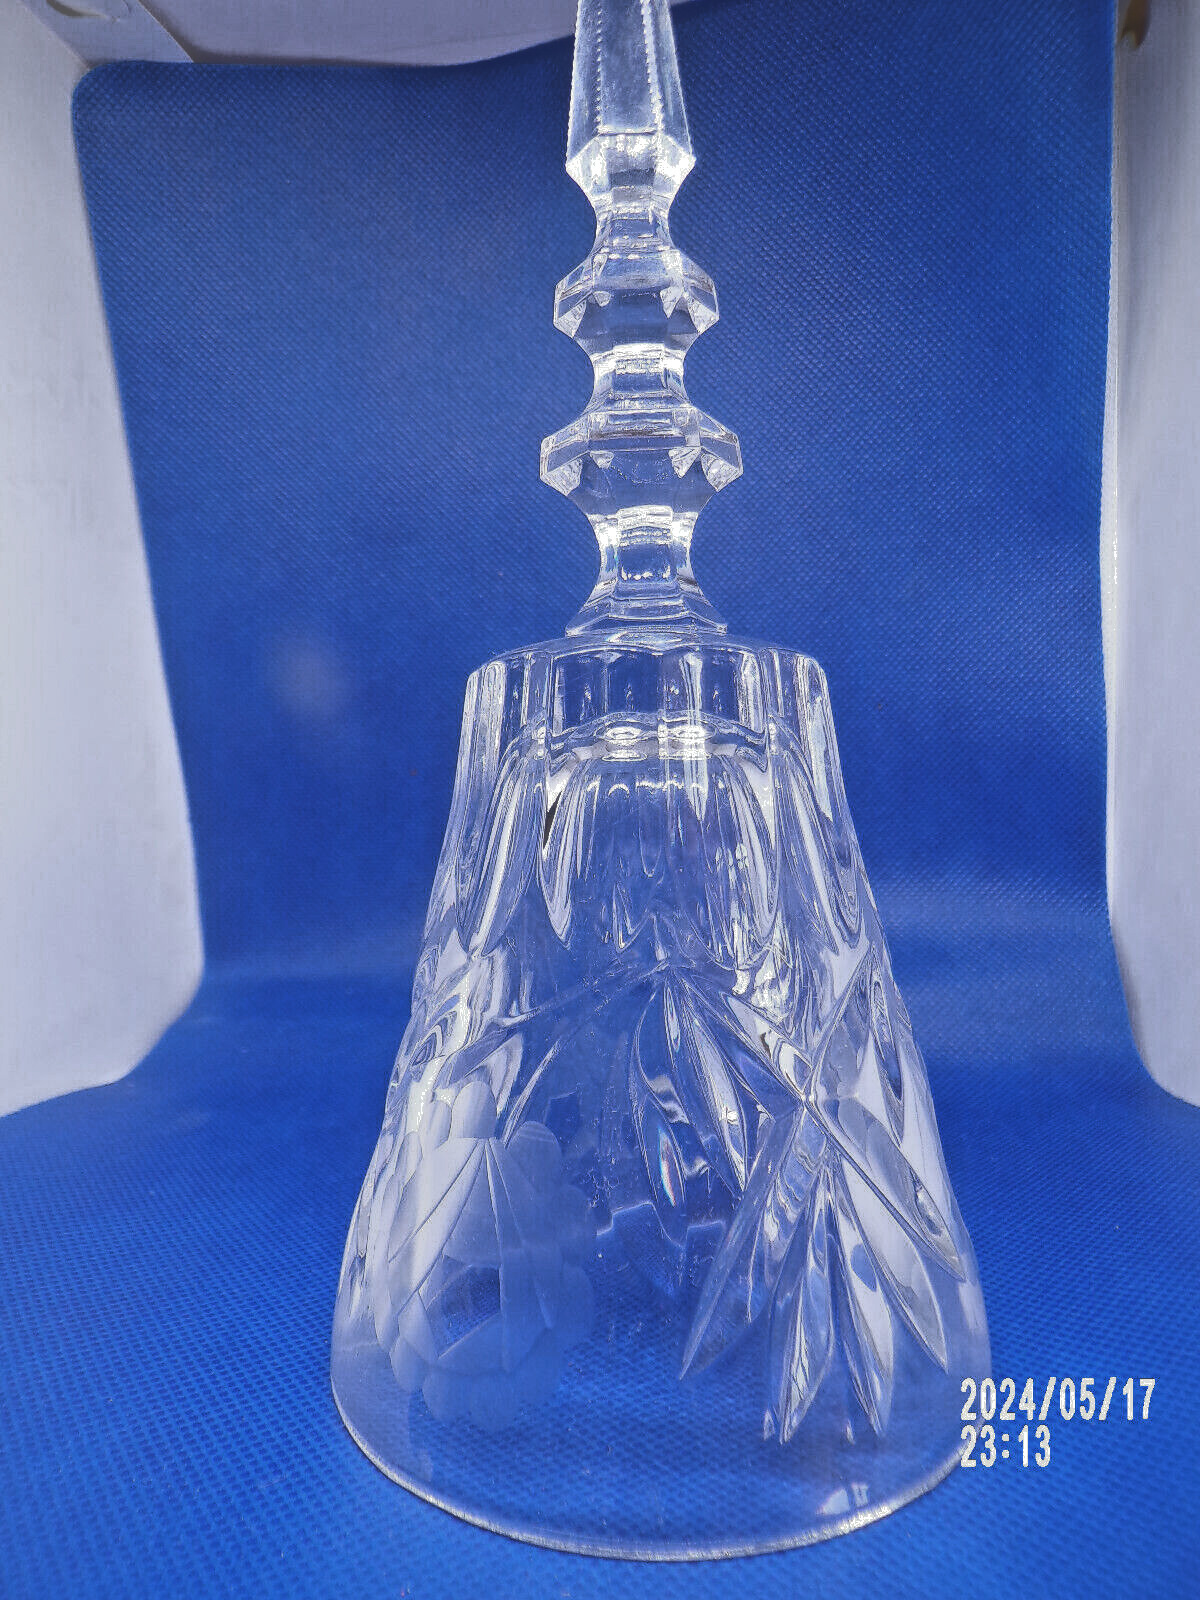 pre own glass bell,7.5 inches tall,can\'t tell if it is crystal.